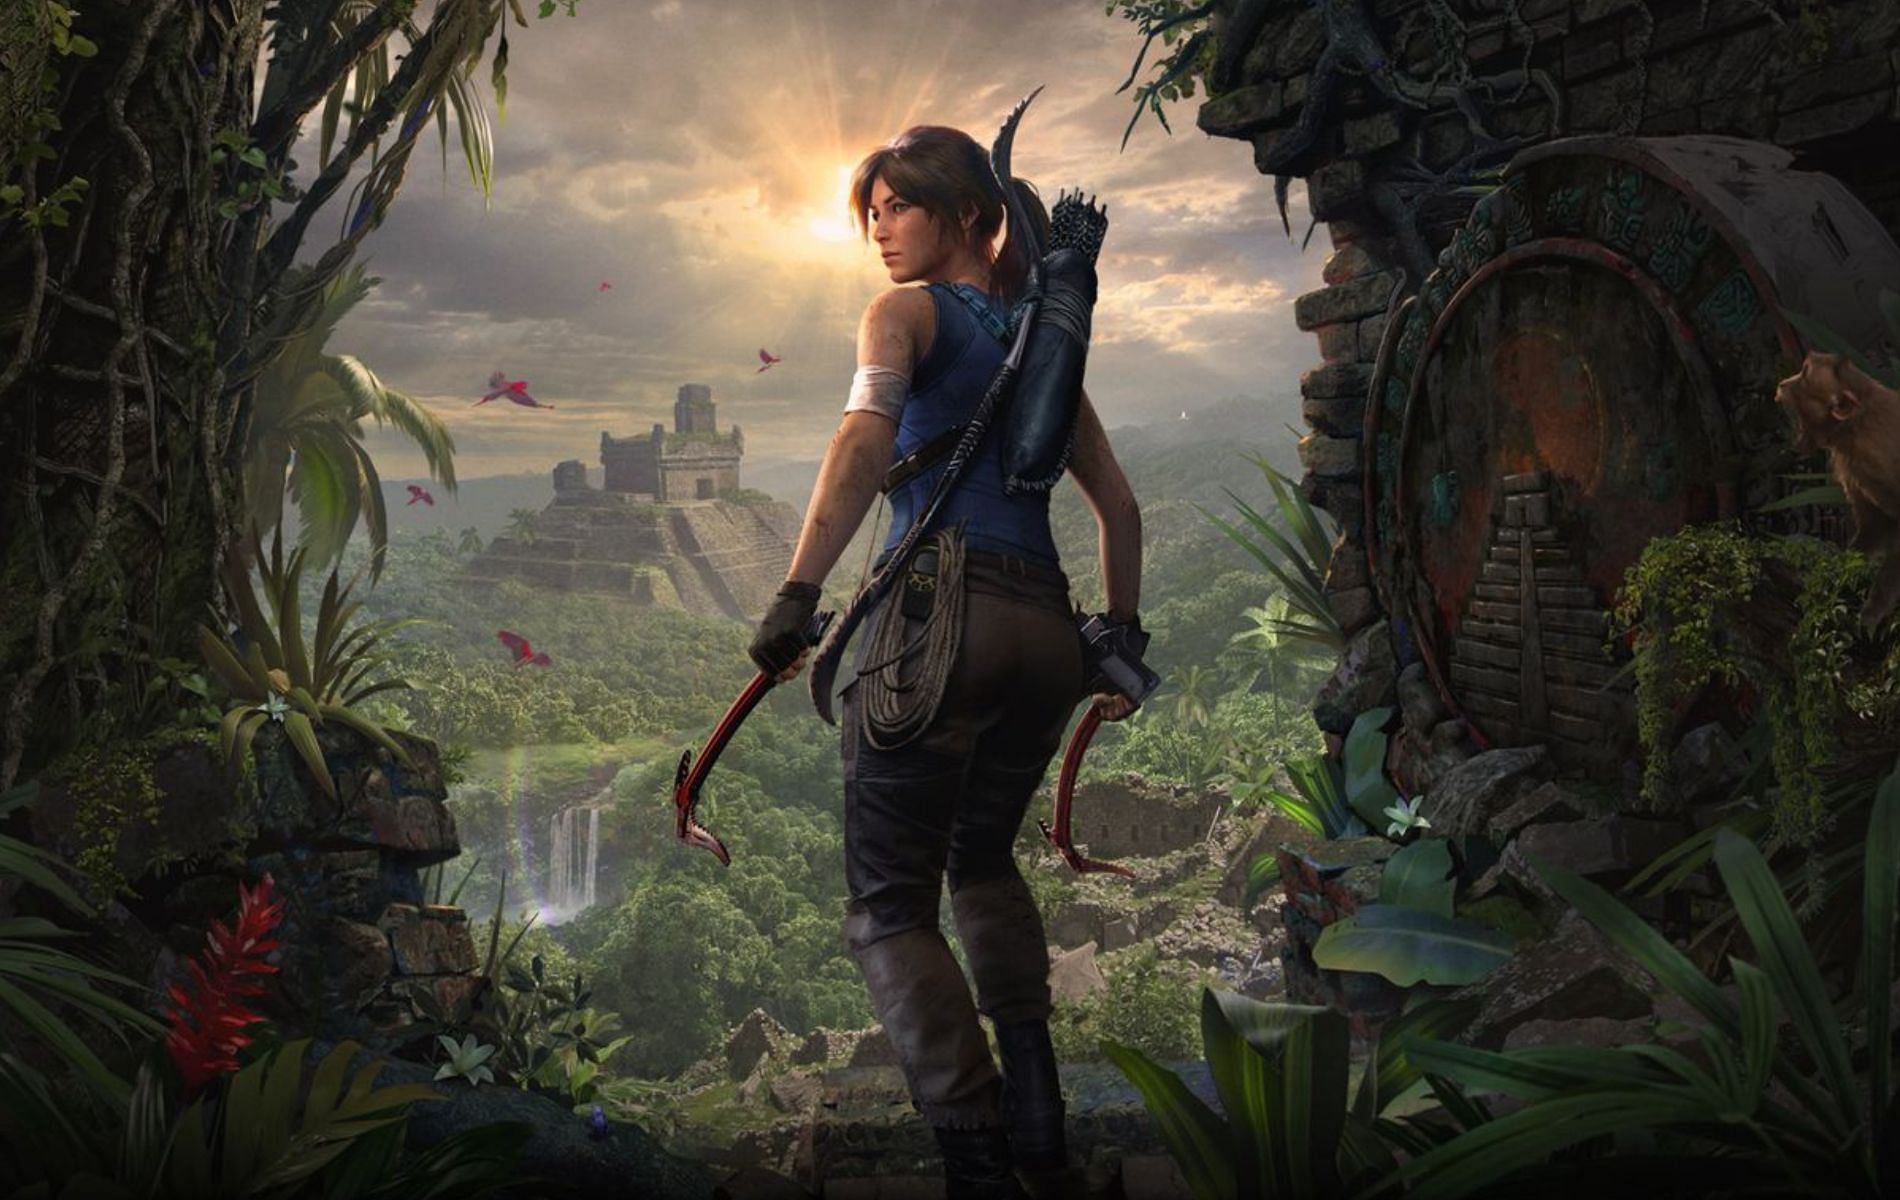 In the action-adventure title Tomb Raider, players have to explore historical ruins and keep themselves alive (Image via Crystal Dynamics)